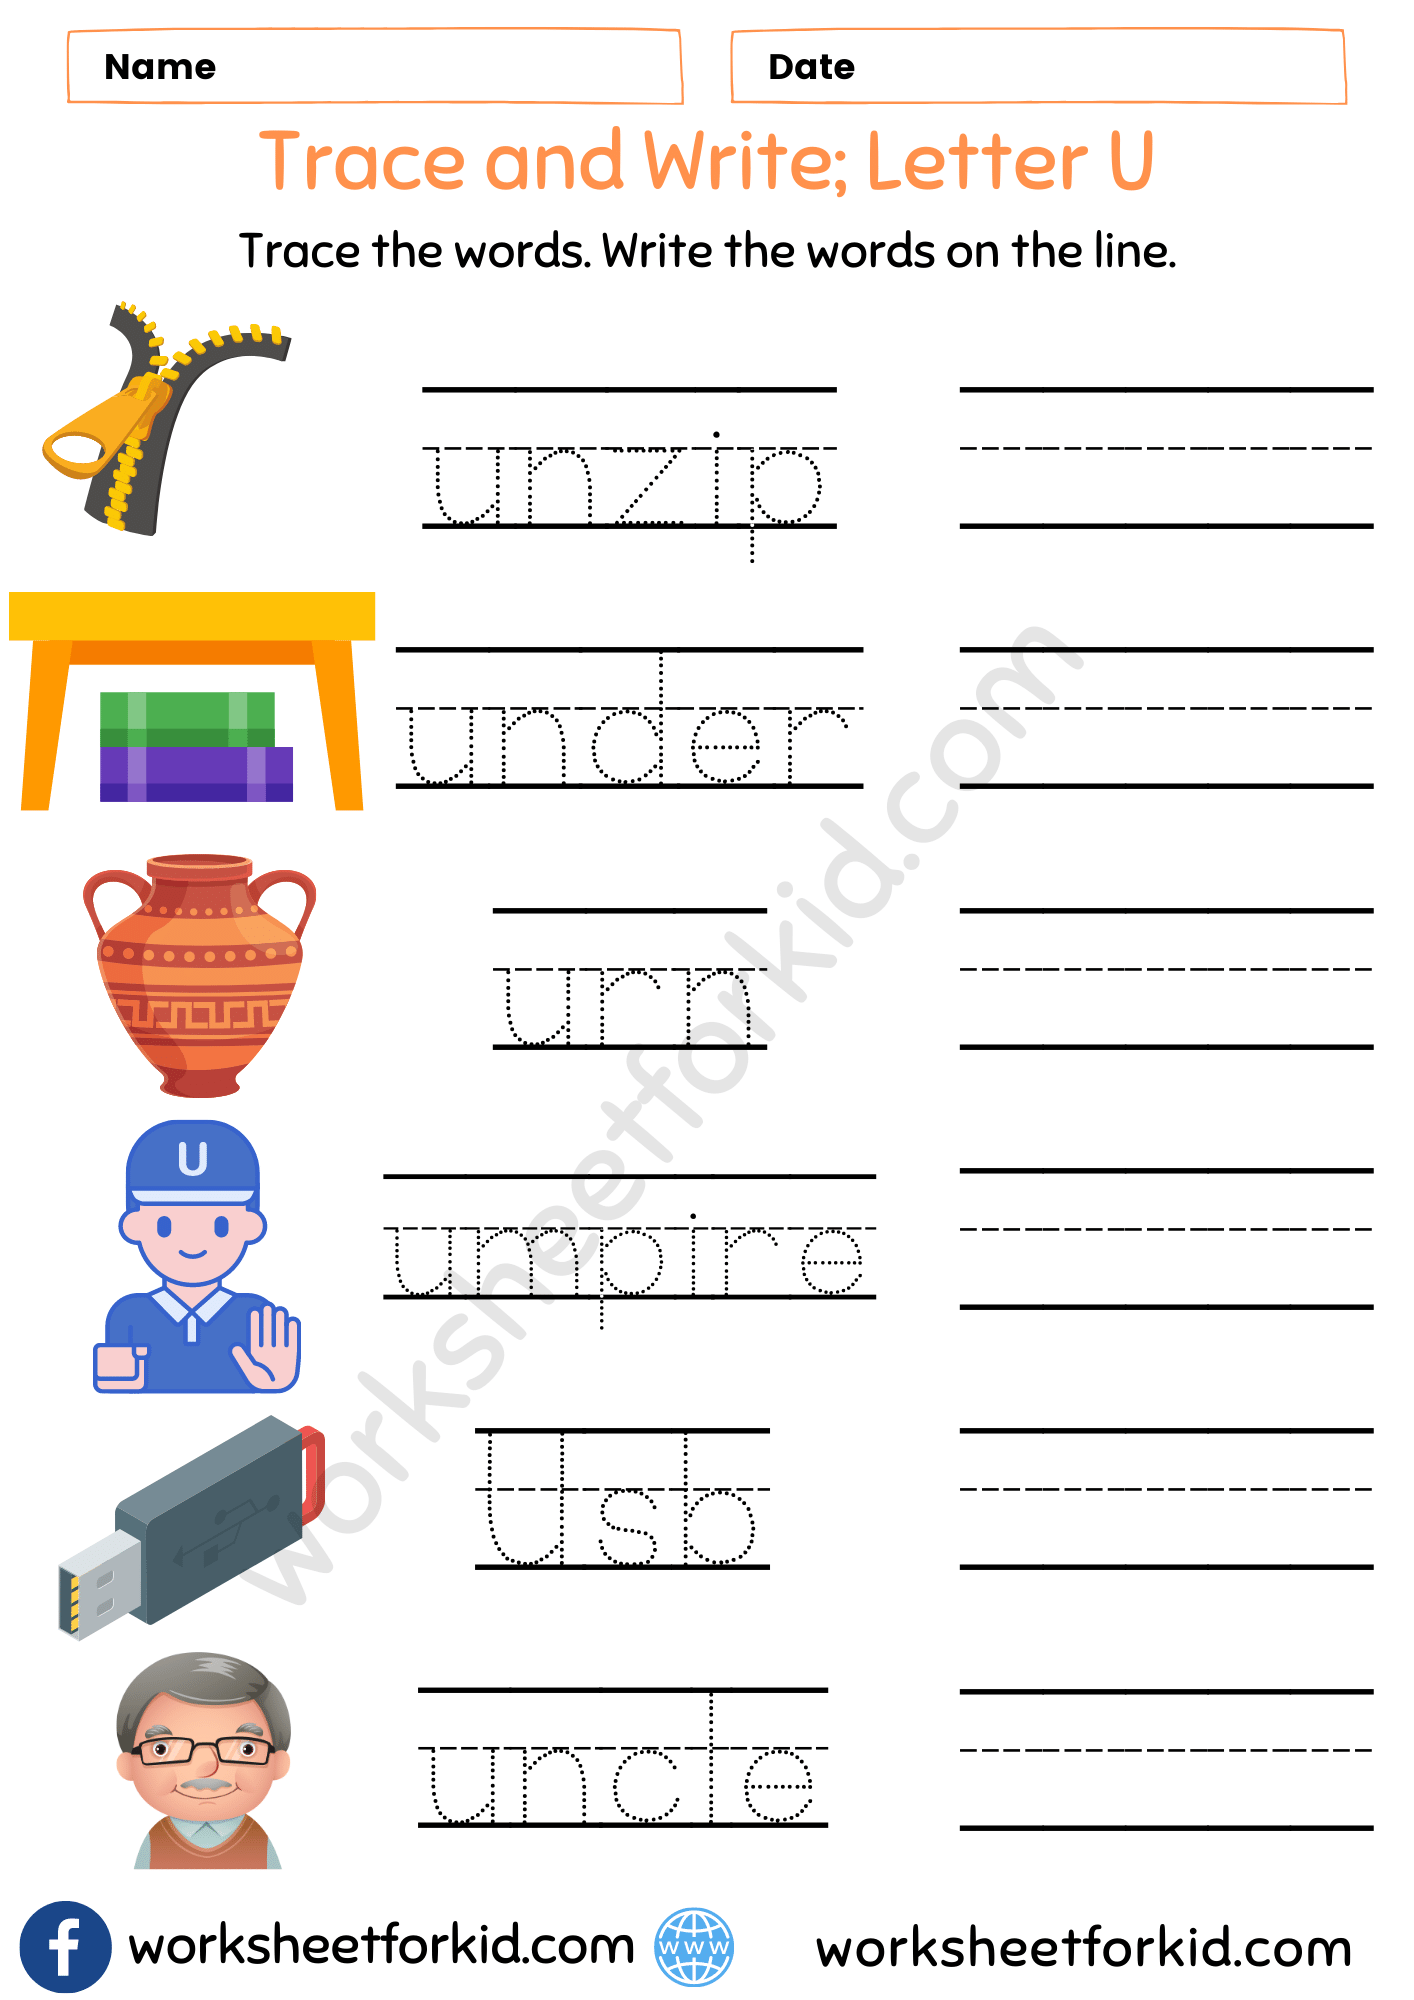 Trace and Write Words Worksheet-Letter U